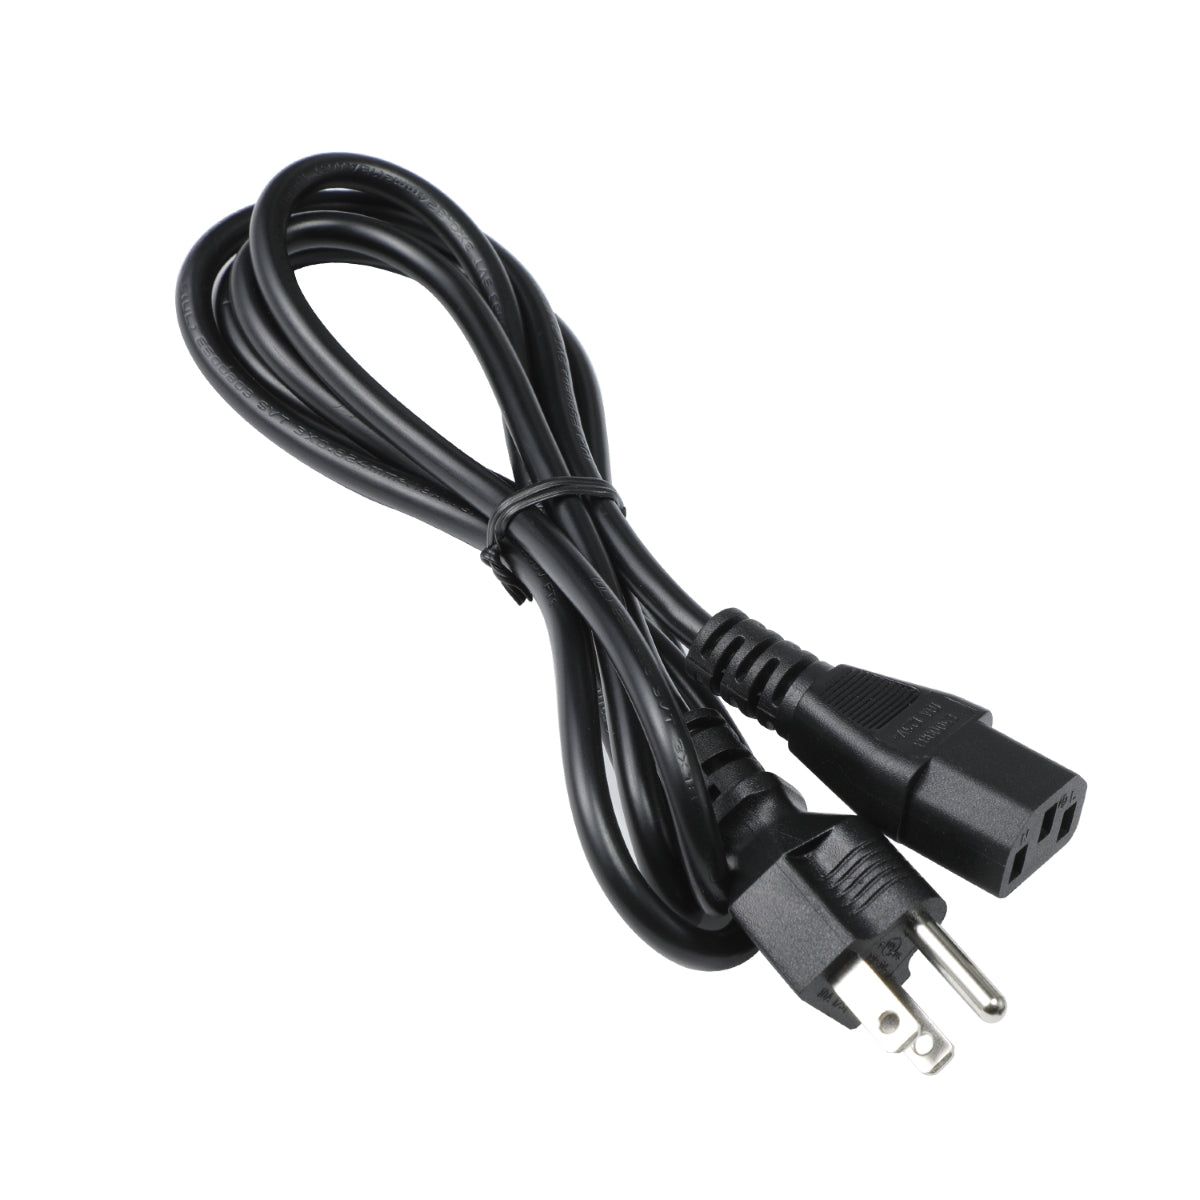 Power Cord for Dell Alienware 25 AW2521HF Monitor